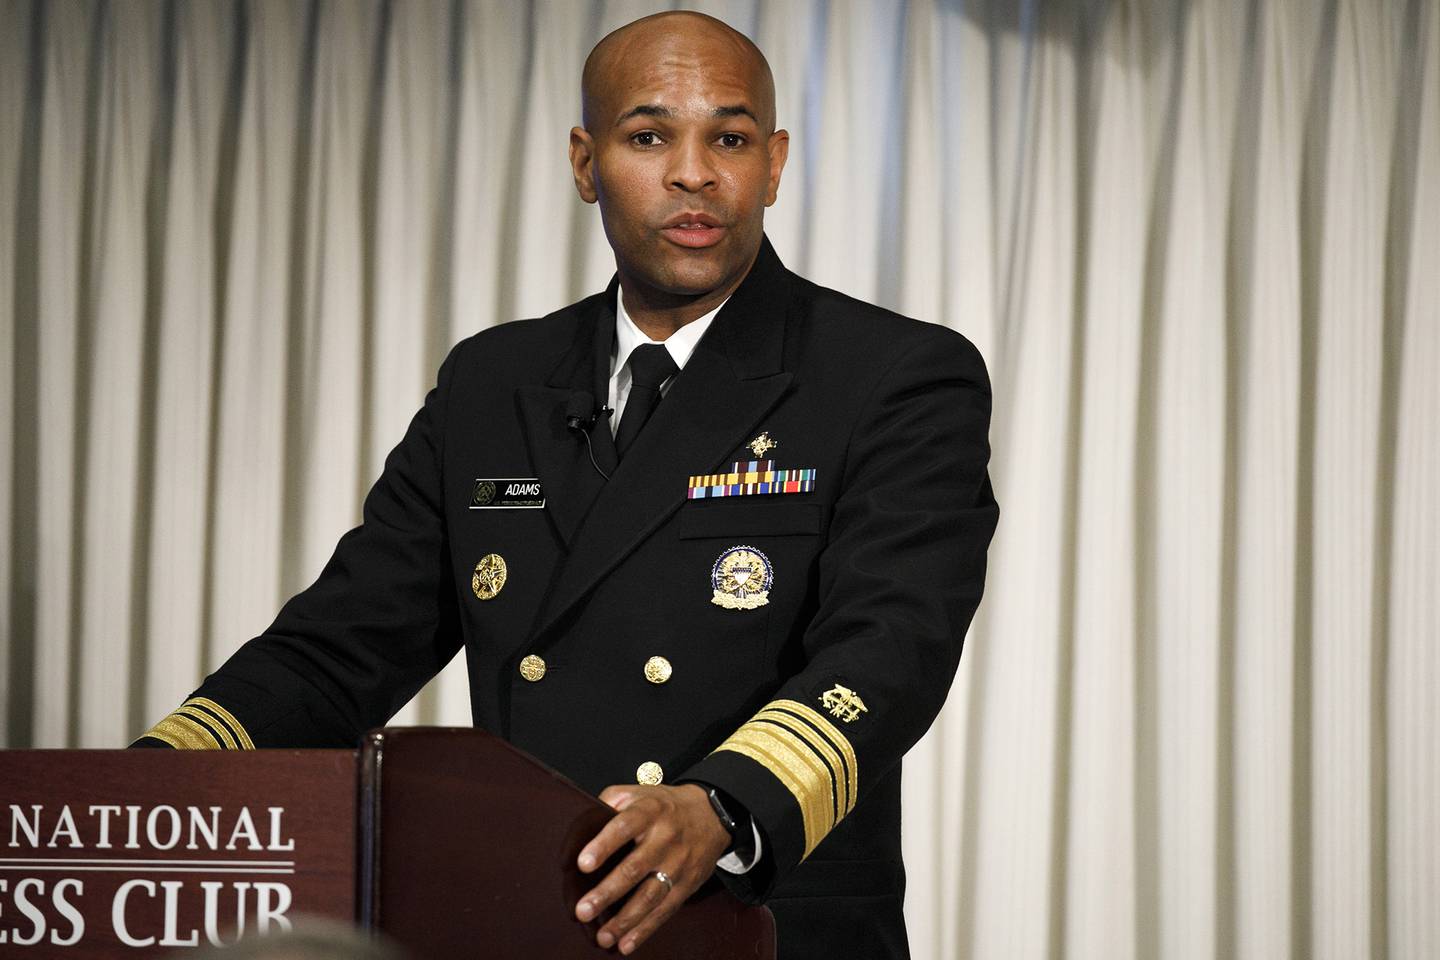 Surgeon General Jerome Adams speaks at the National Press Club about a campaign to raise awareness on the risks of veterans suicide, Tuesday, July 7, 2020, in Washington.